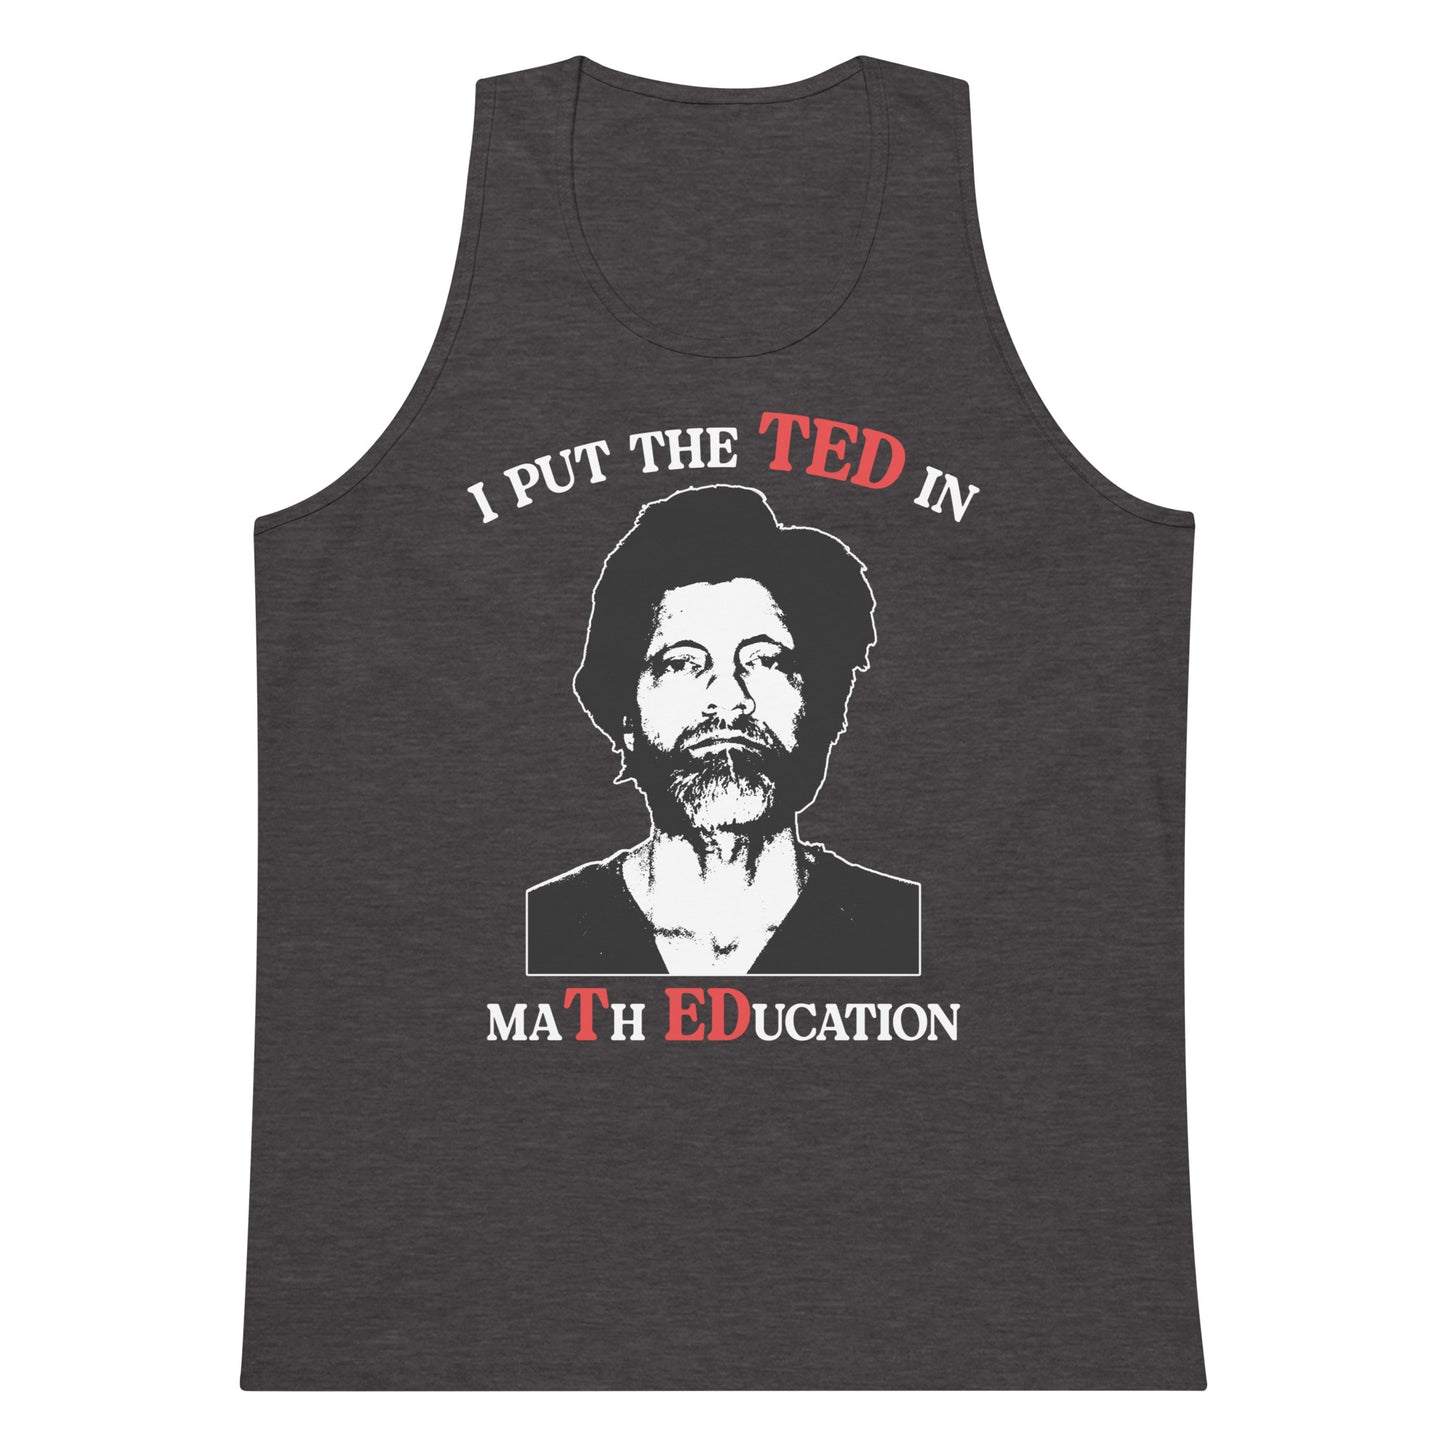 TED in maTh EDucation tank top